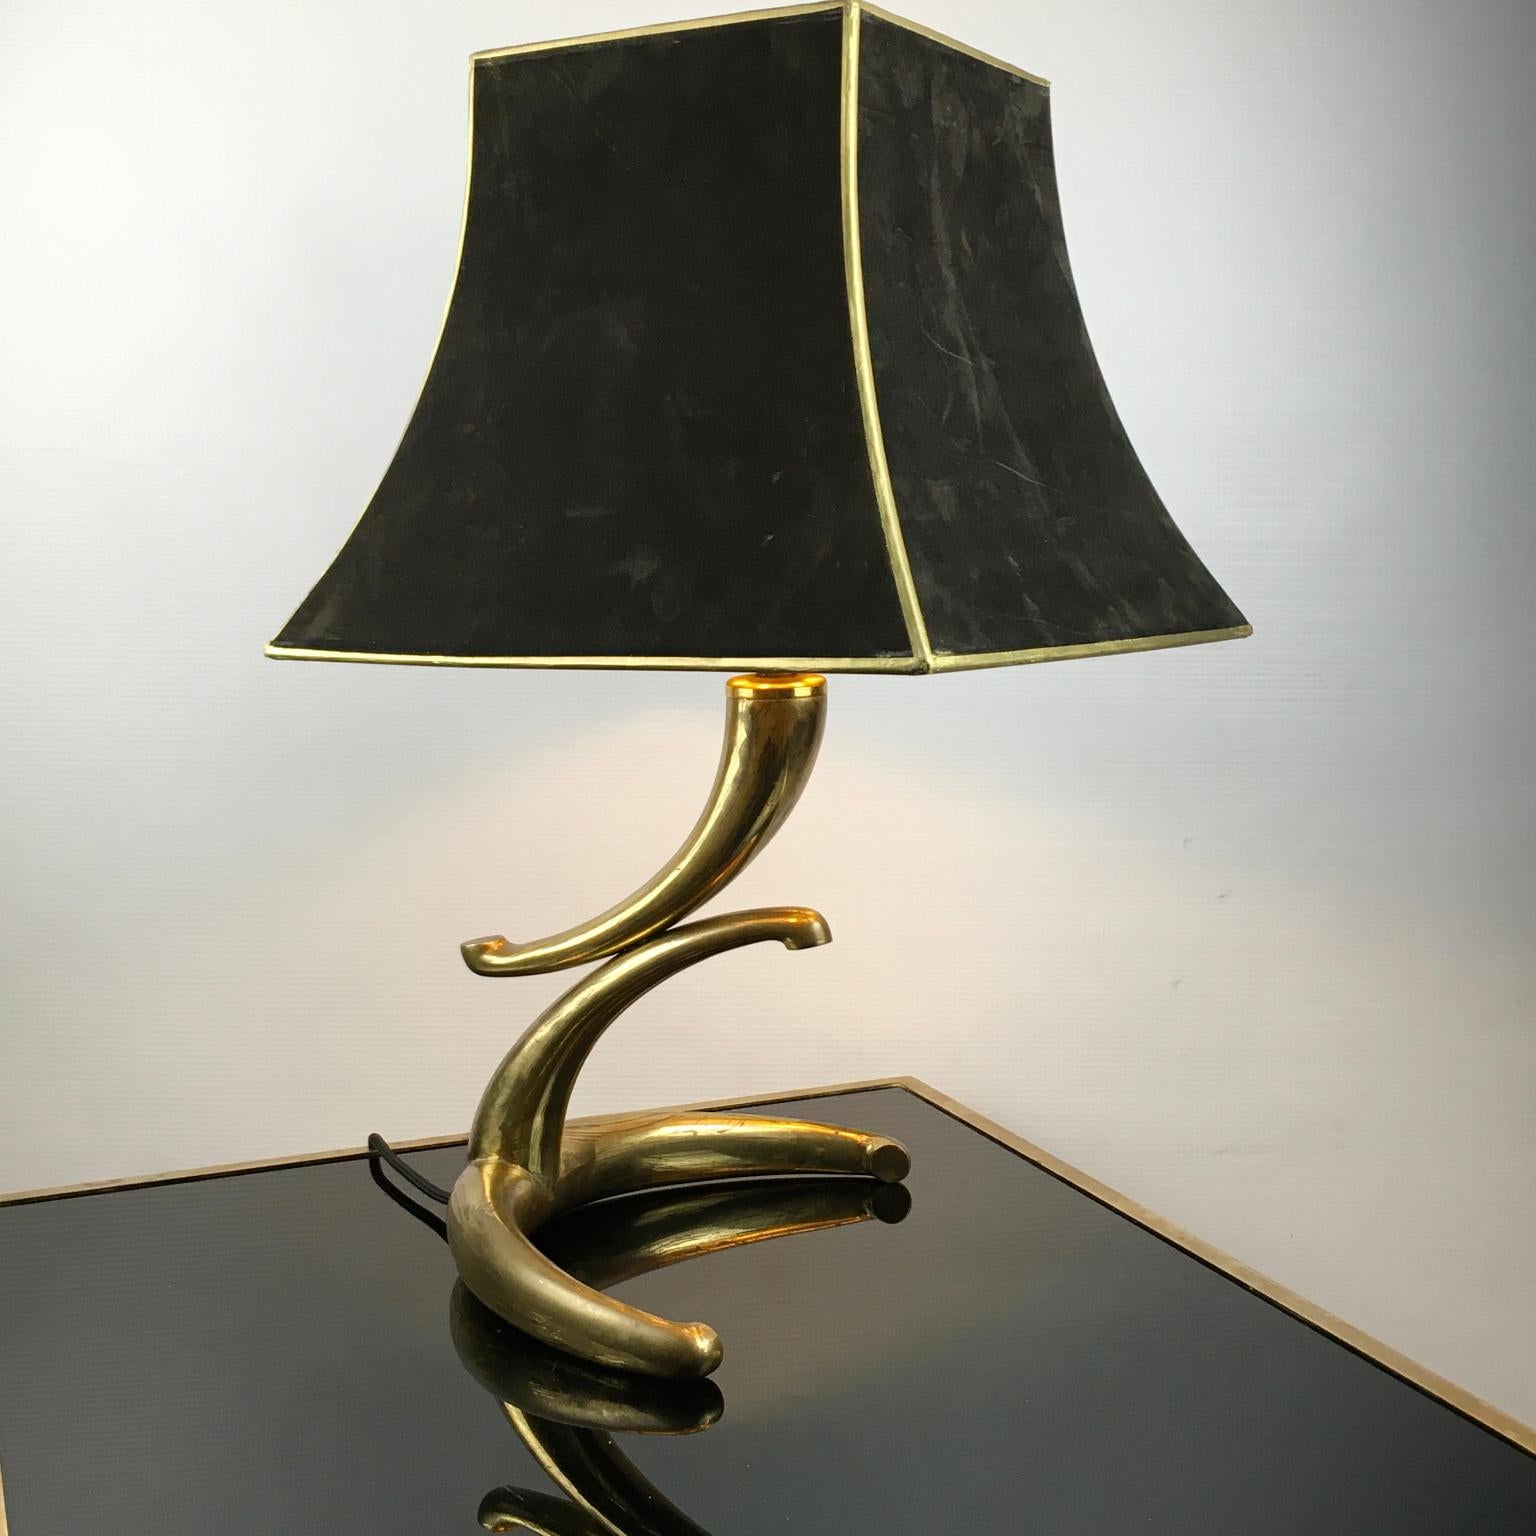 Metalwork 1970s Table Lamp in Solid Brass Horns Shape with Velvet Lampshade, France For Sale